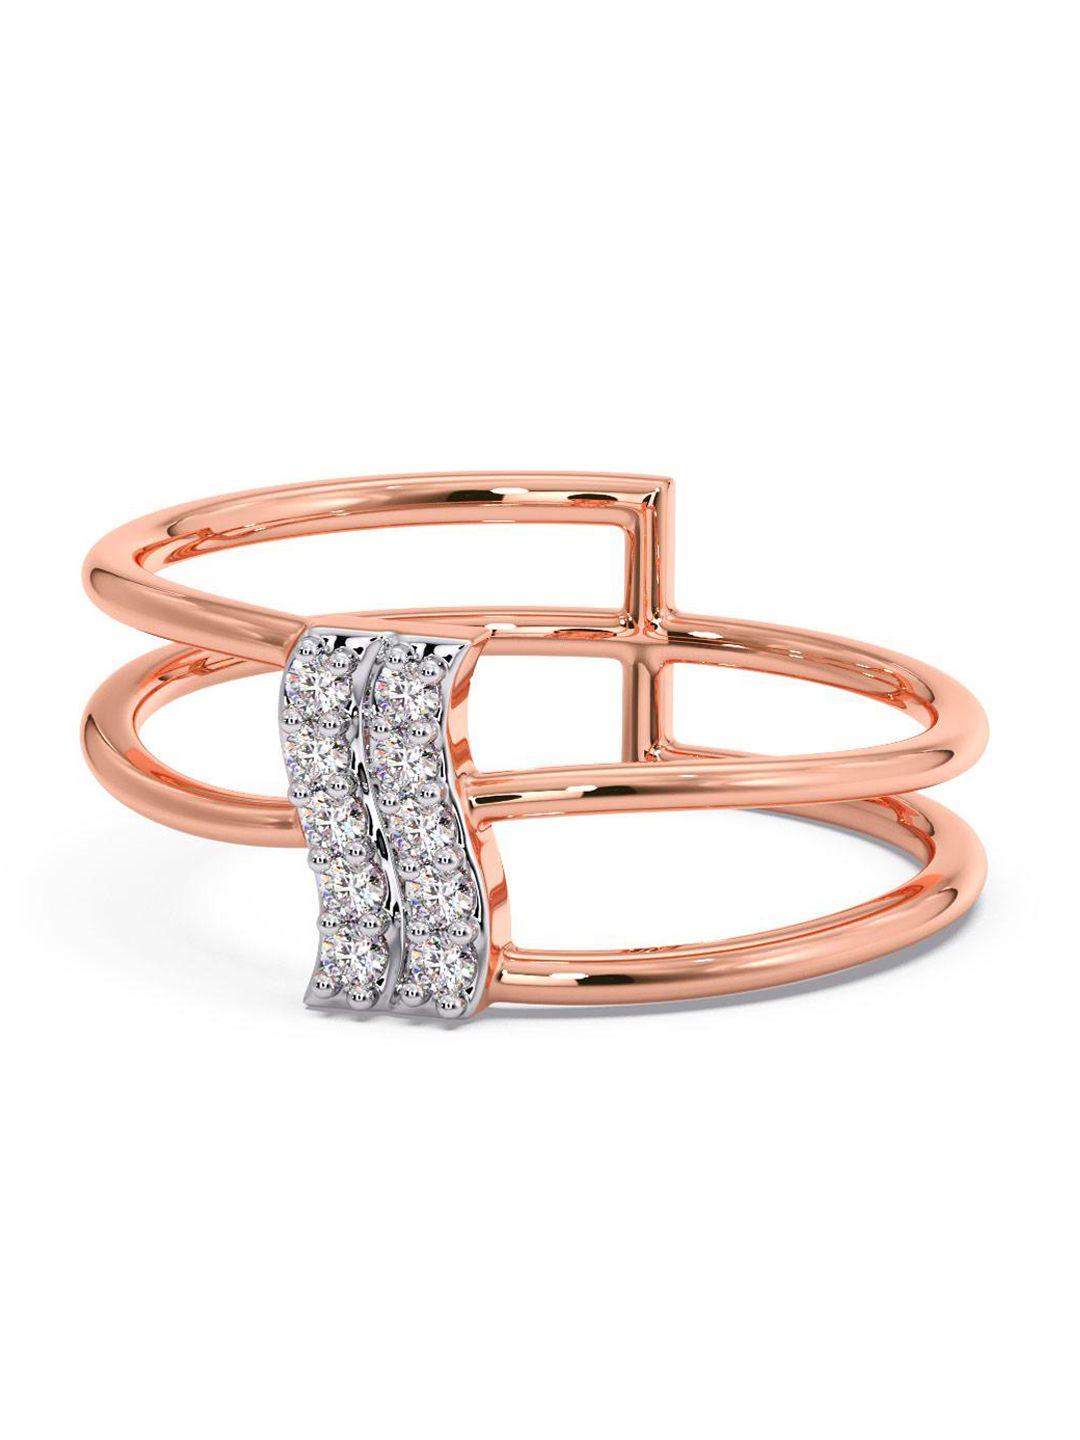 candere a kalyan jewellers company 14kt rose gold diamond finger ring-1.74gm